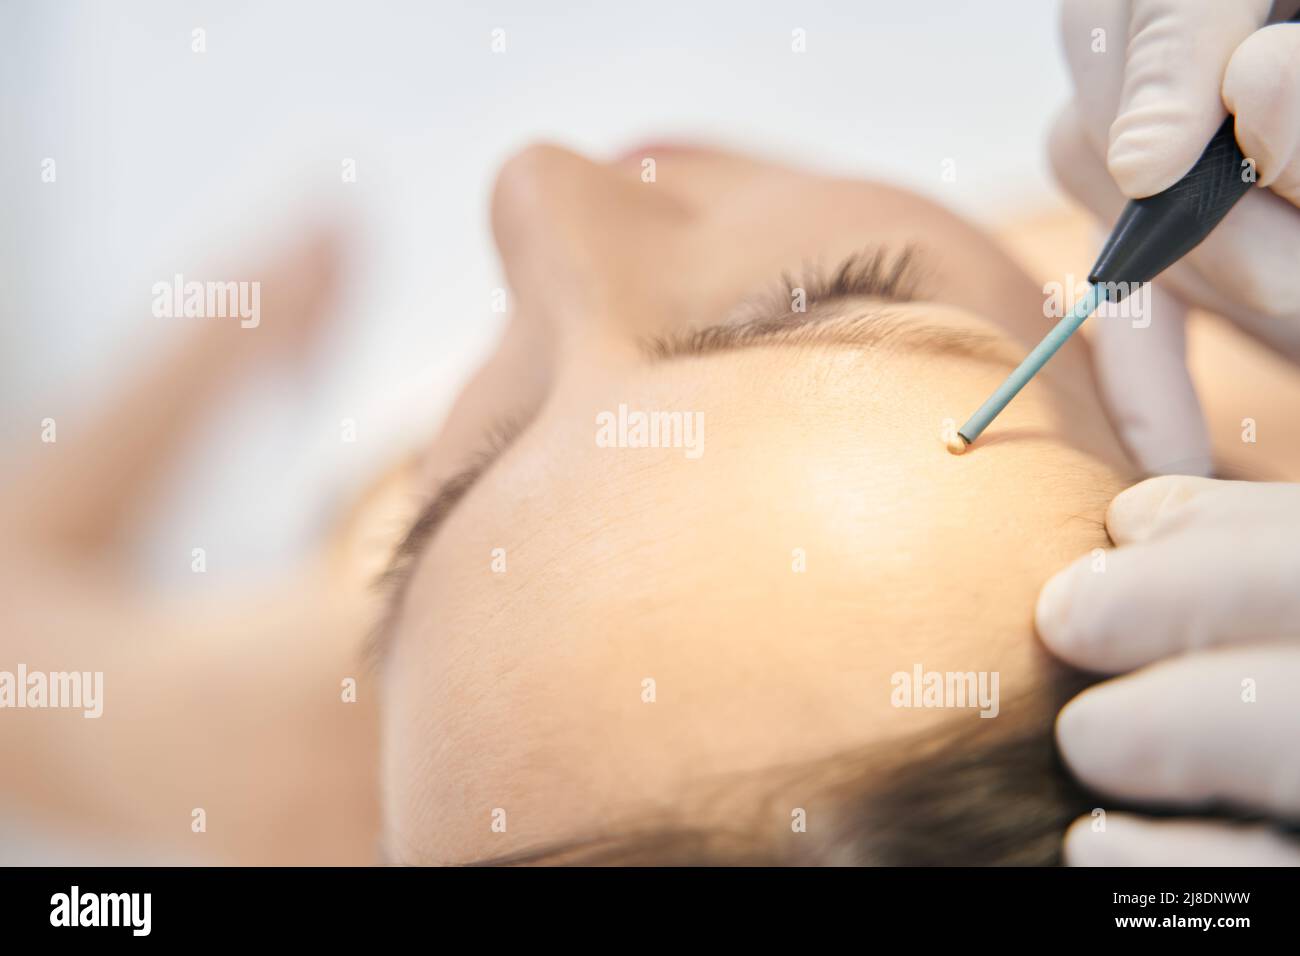 Woman receiving mole removal skincare treatment in clinic Stock Photo